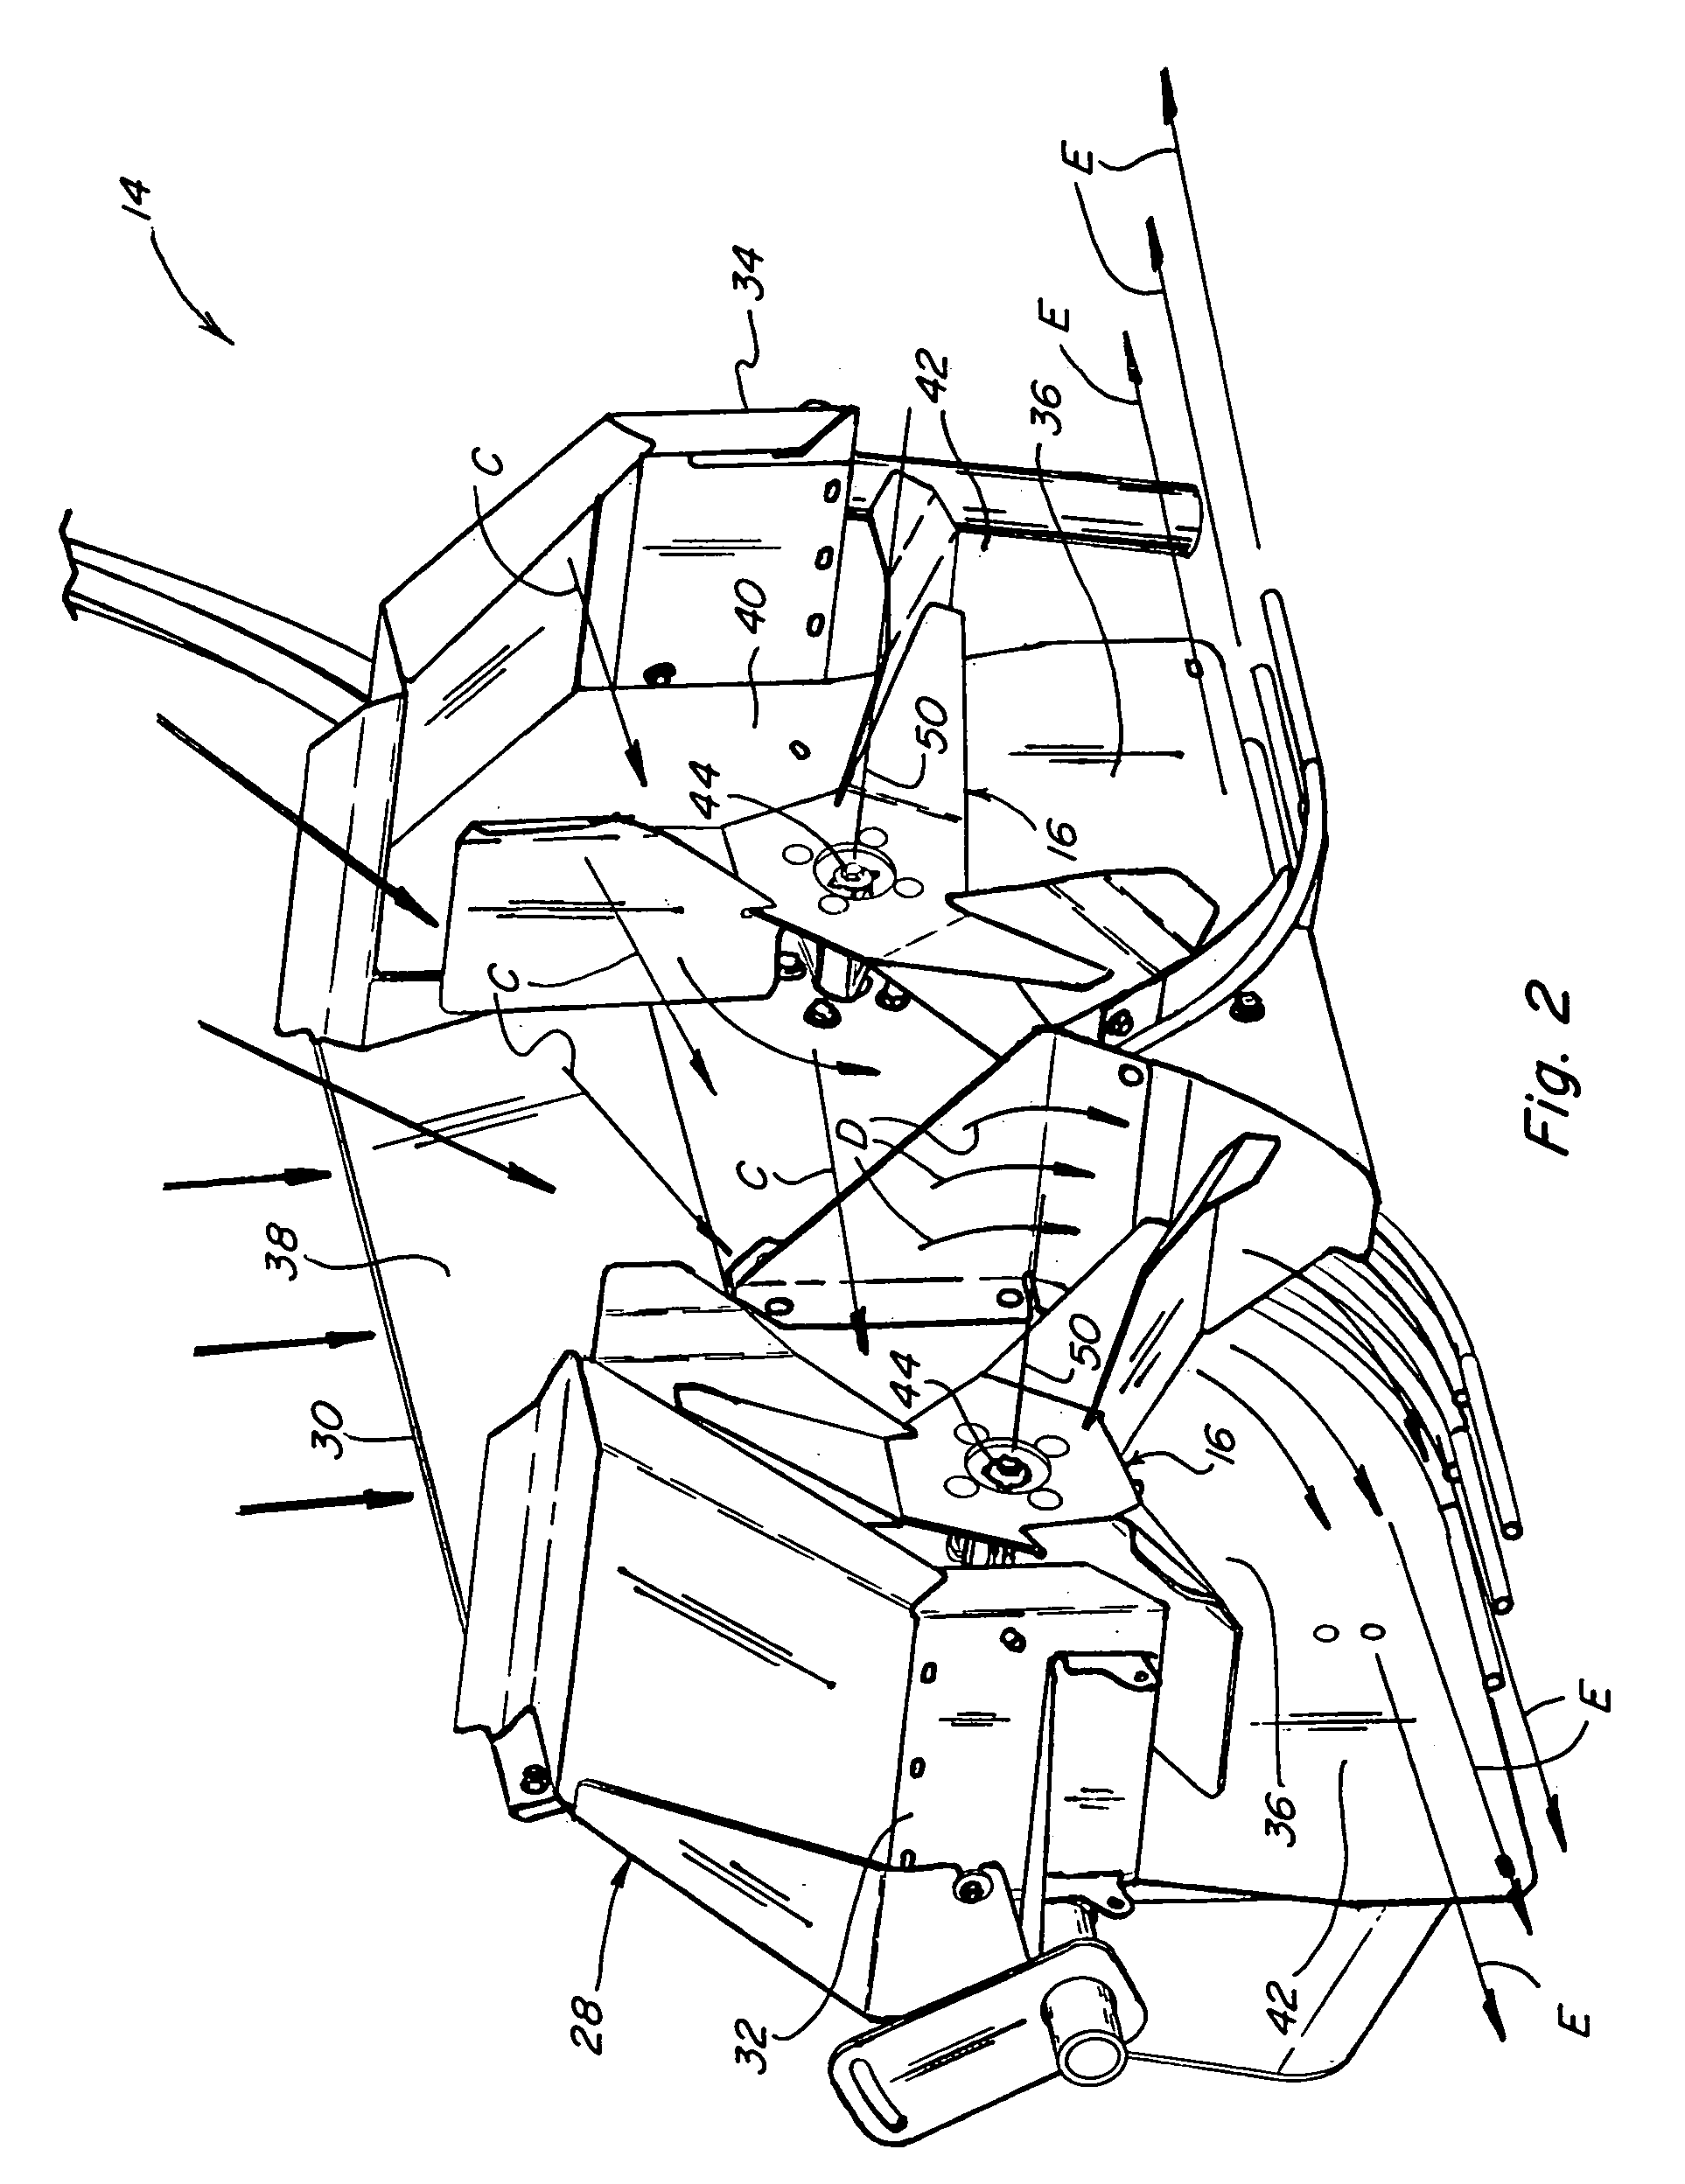 Rotary accelerating apparatus for a vertical straw and chaff spreader of an agricultural combine